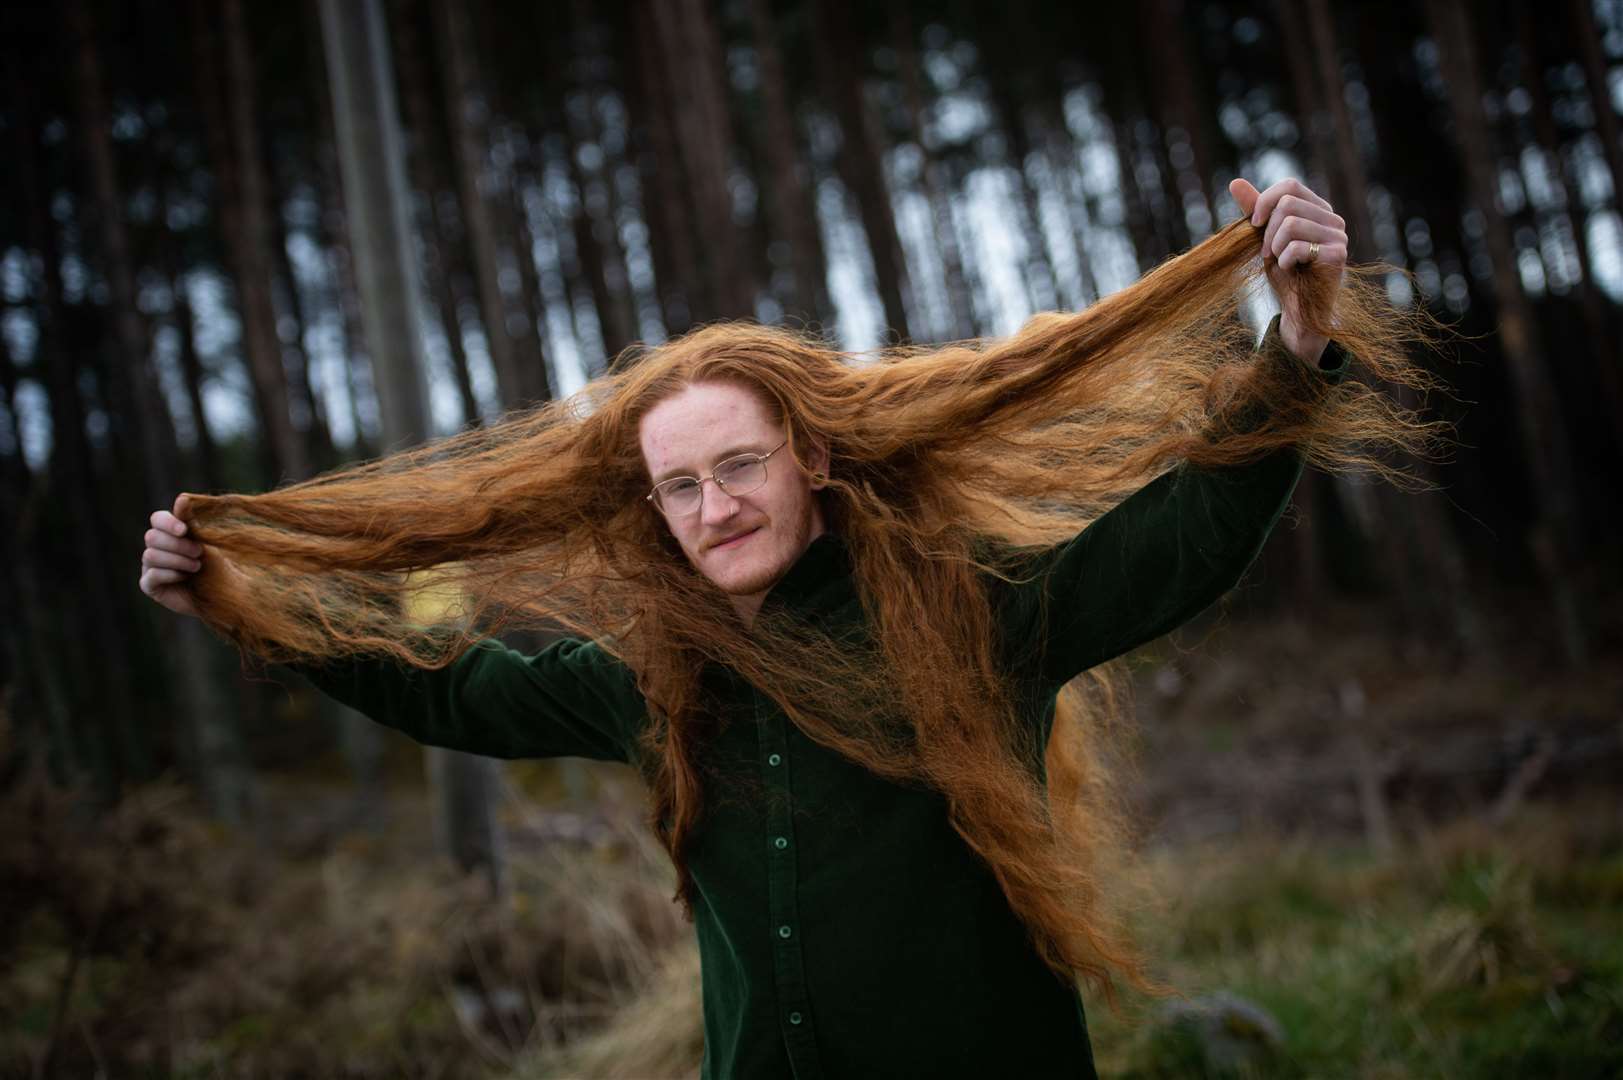 Tesco check out supervisor Charles Borthwick to have hair chopped for Little Princess Trust...Picture: Callum Mackay..